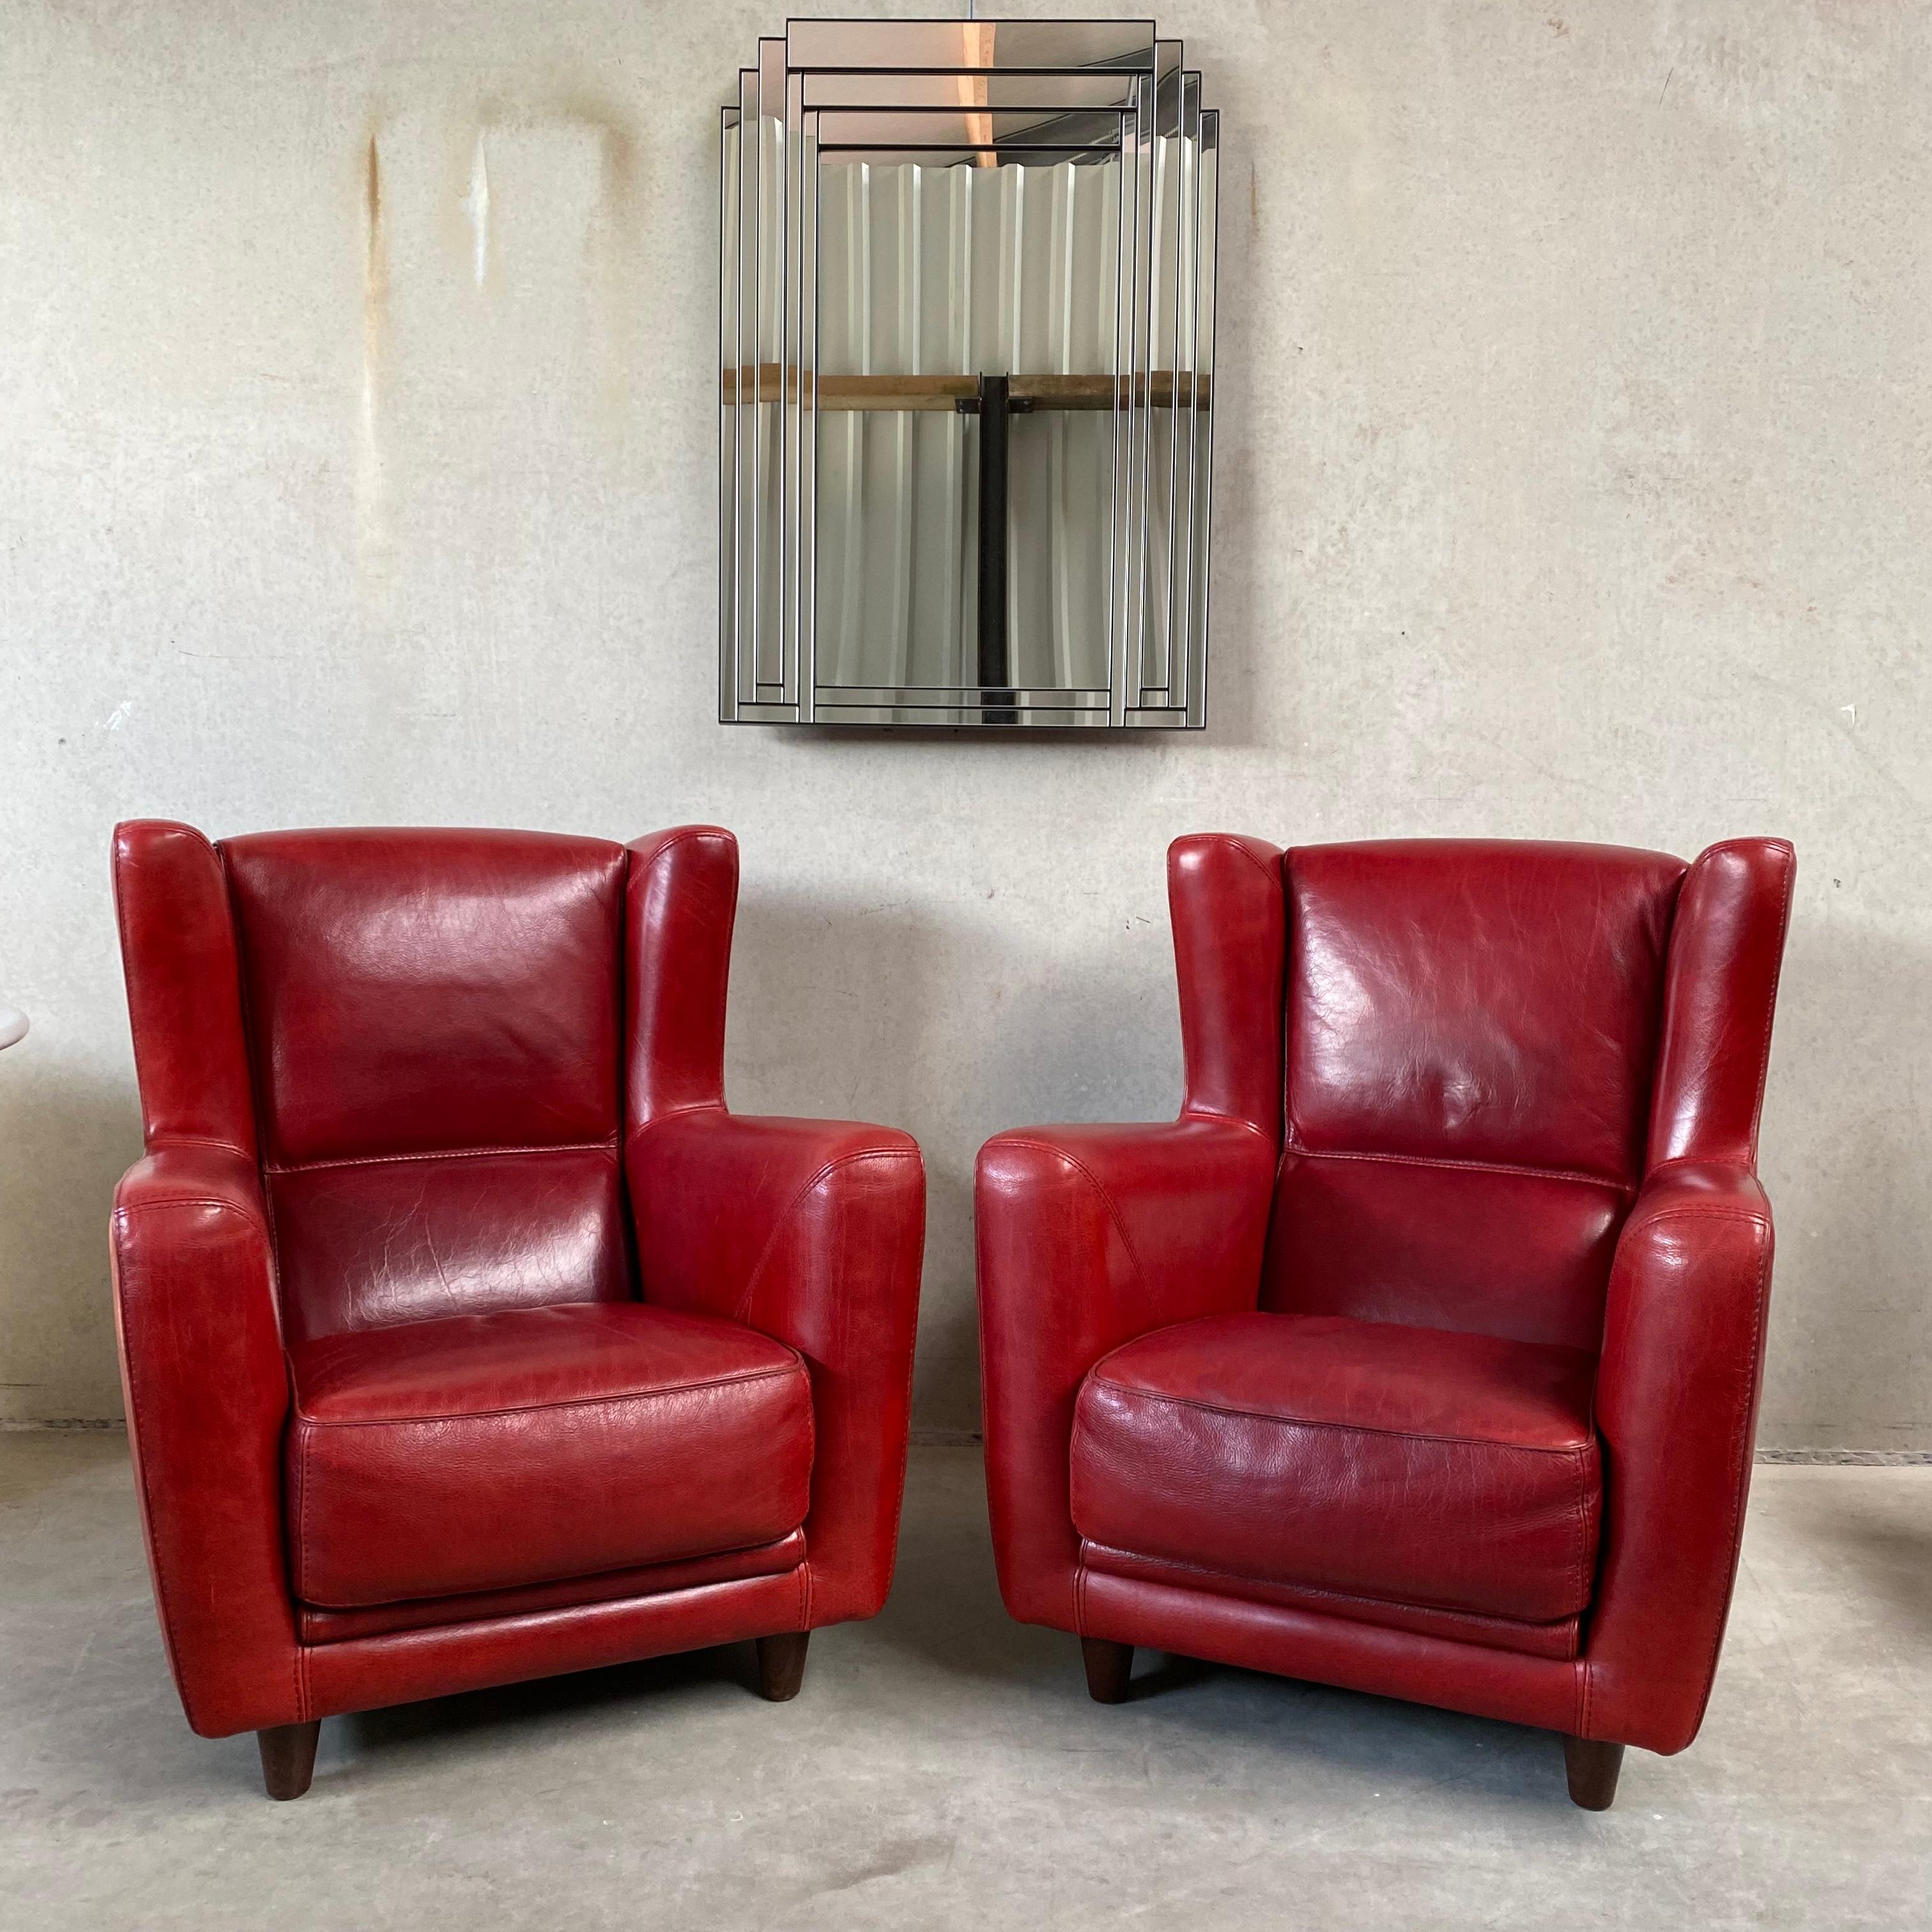 Pair of Ox-Blood Red Leather Lounge Chairs Begére by Baxter Italy 90s For Sale 12